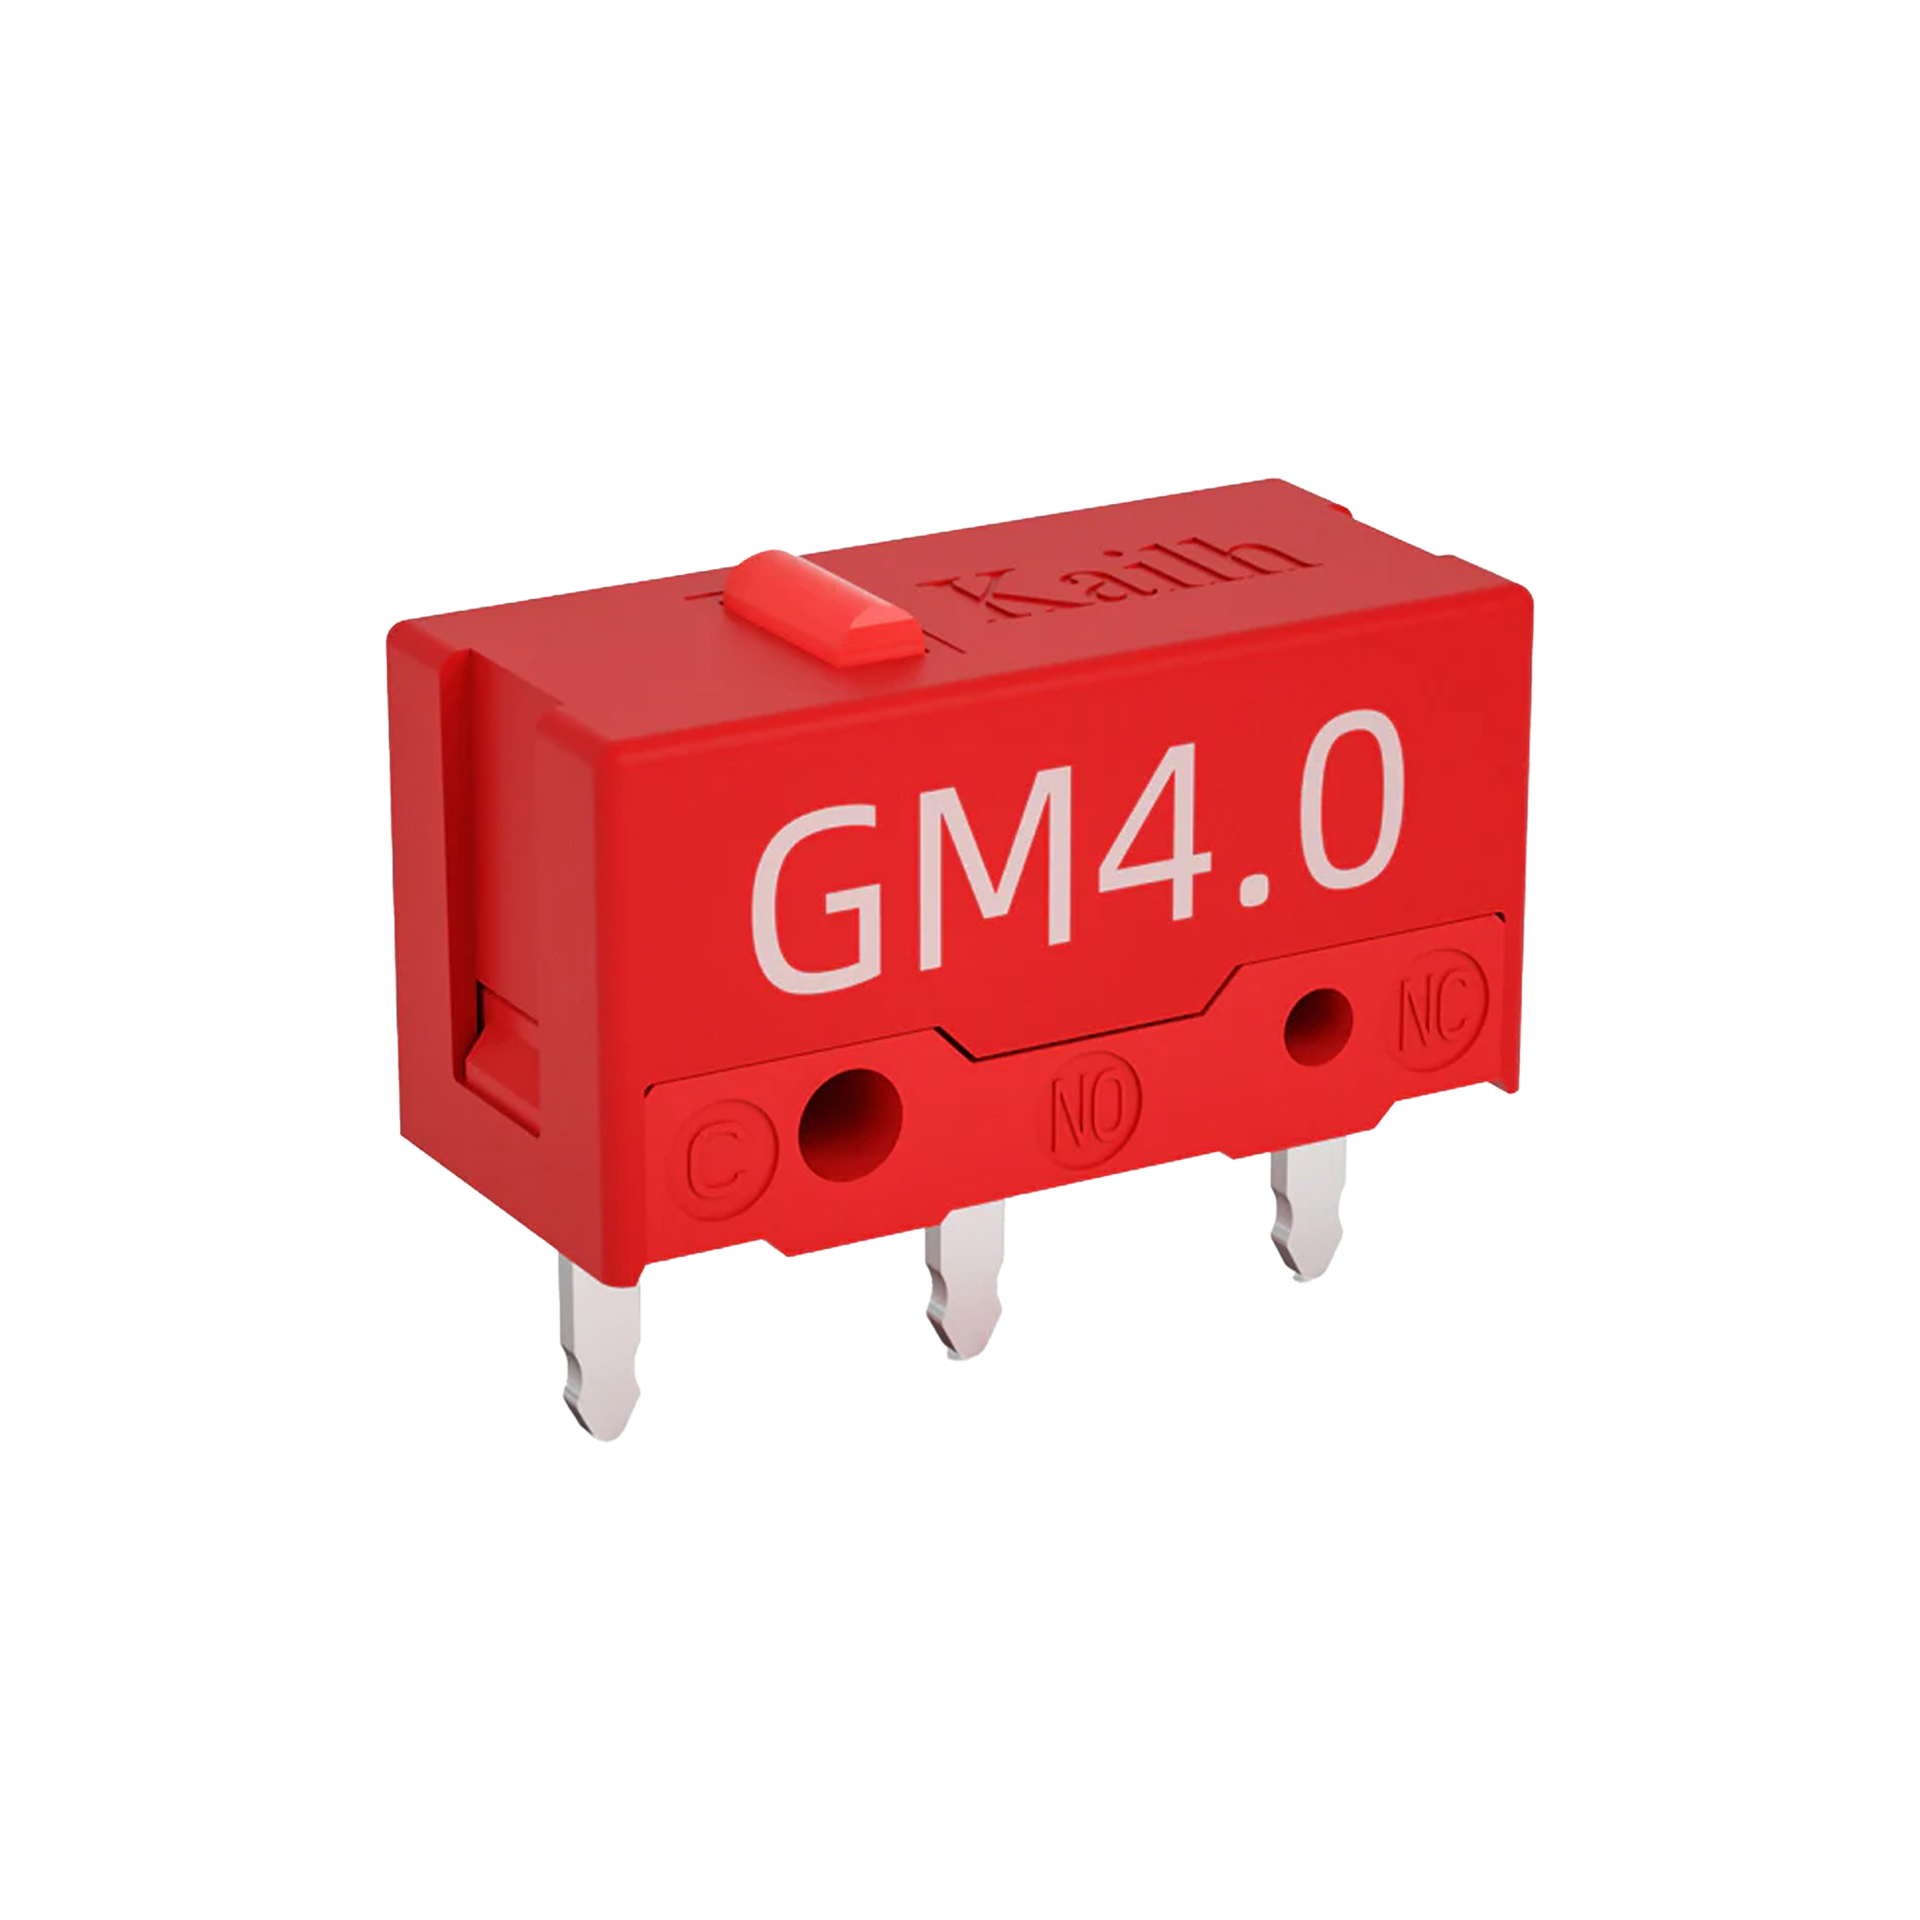 Kailh GM 2.0 4.0 8.0 Mouse Switch-Chosfox